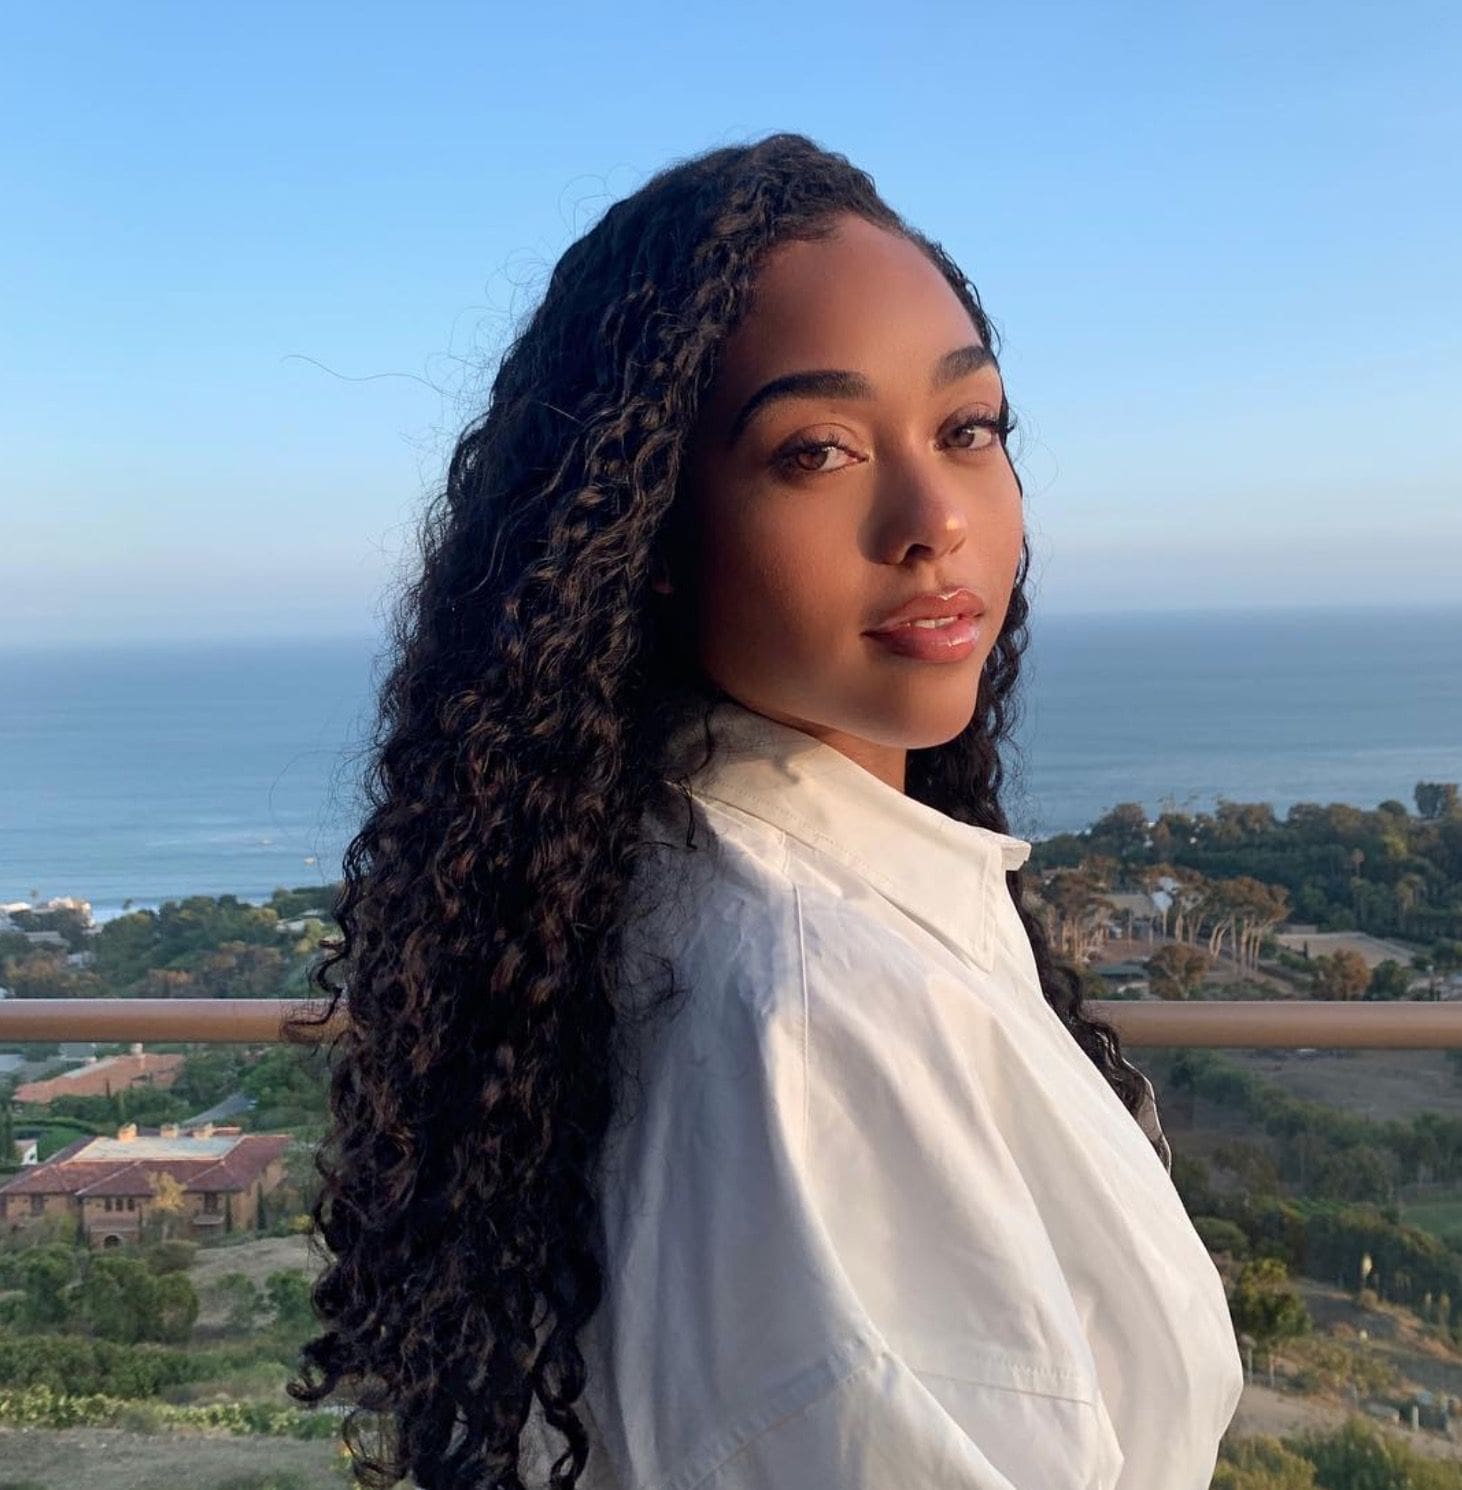 Jordyn Woods Makes Fans Excited With This Video Featuring Her Sister, Jodie Woods